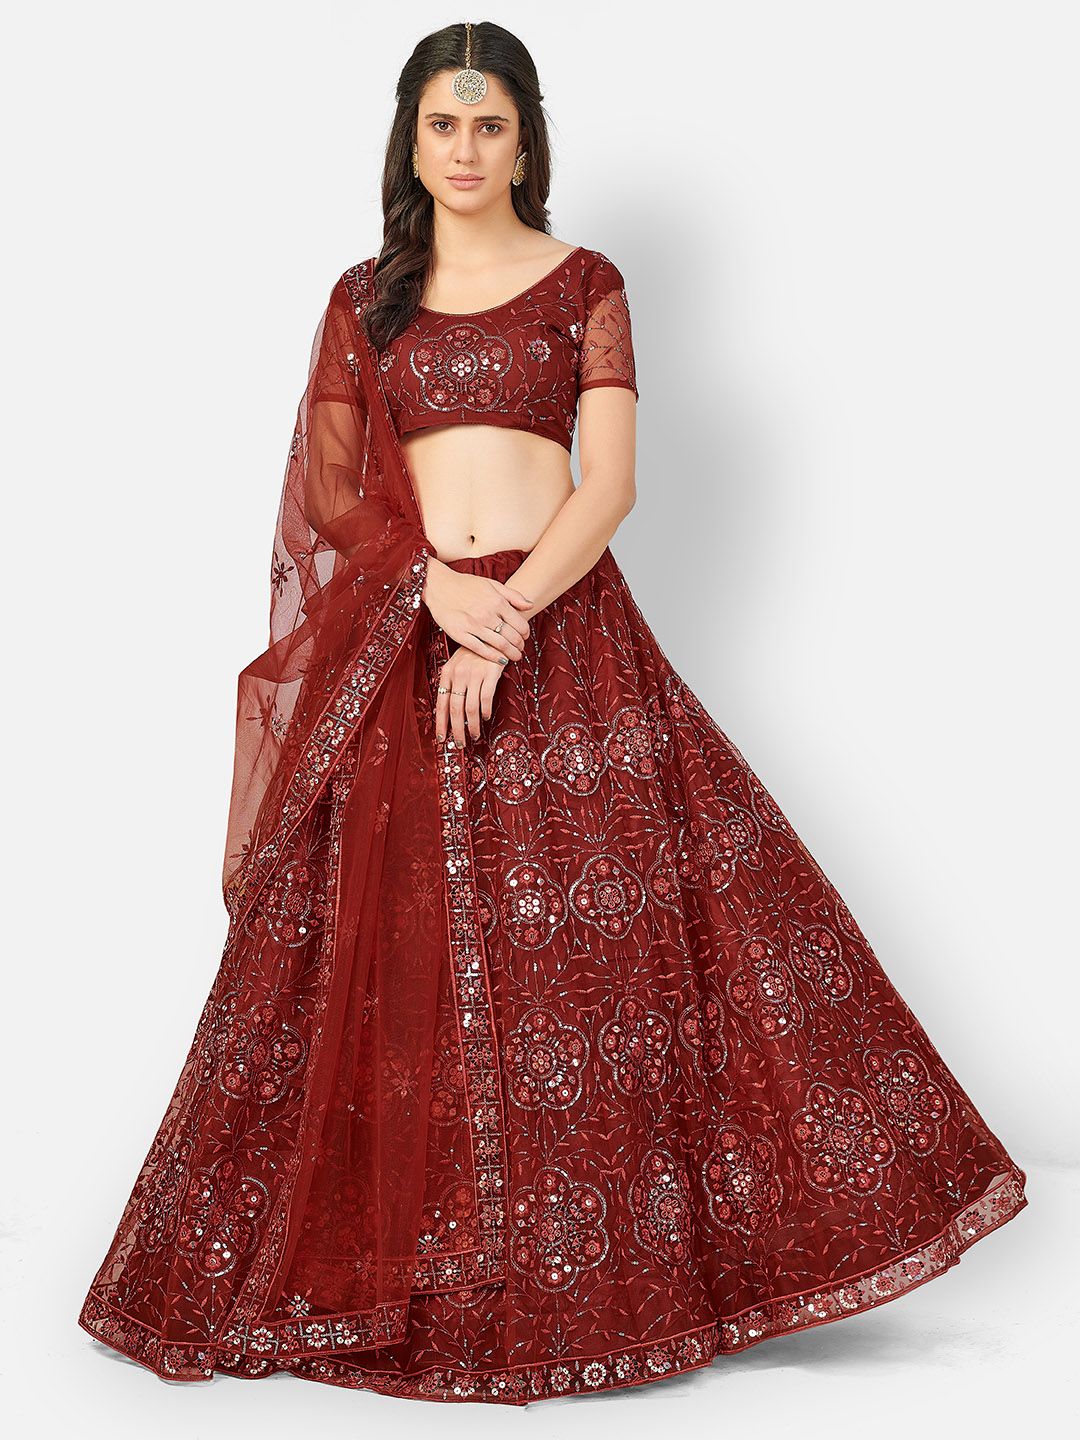 SHOPGARB Maroon & Silver-Toned Embroidered Sequinned Semi-Stitched Lehenga & Unstitched Blouse With Dupatta Price in India